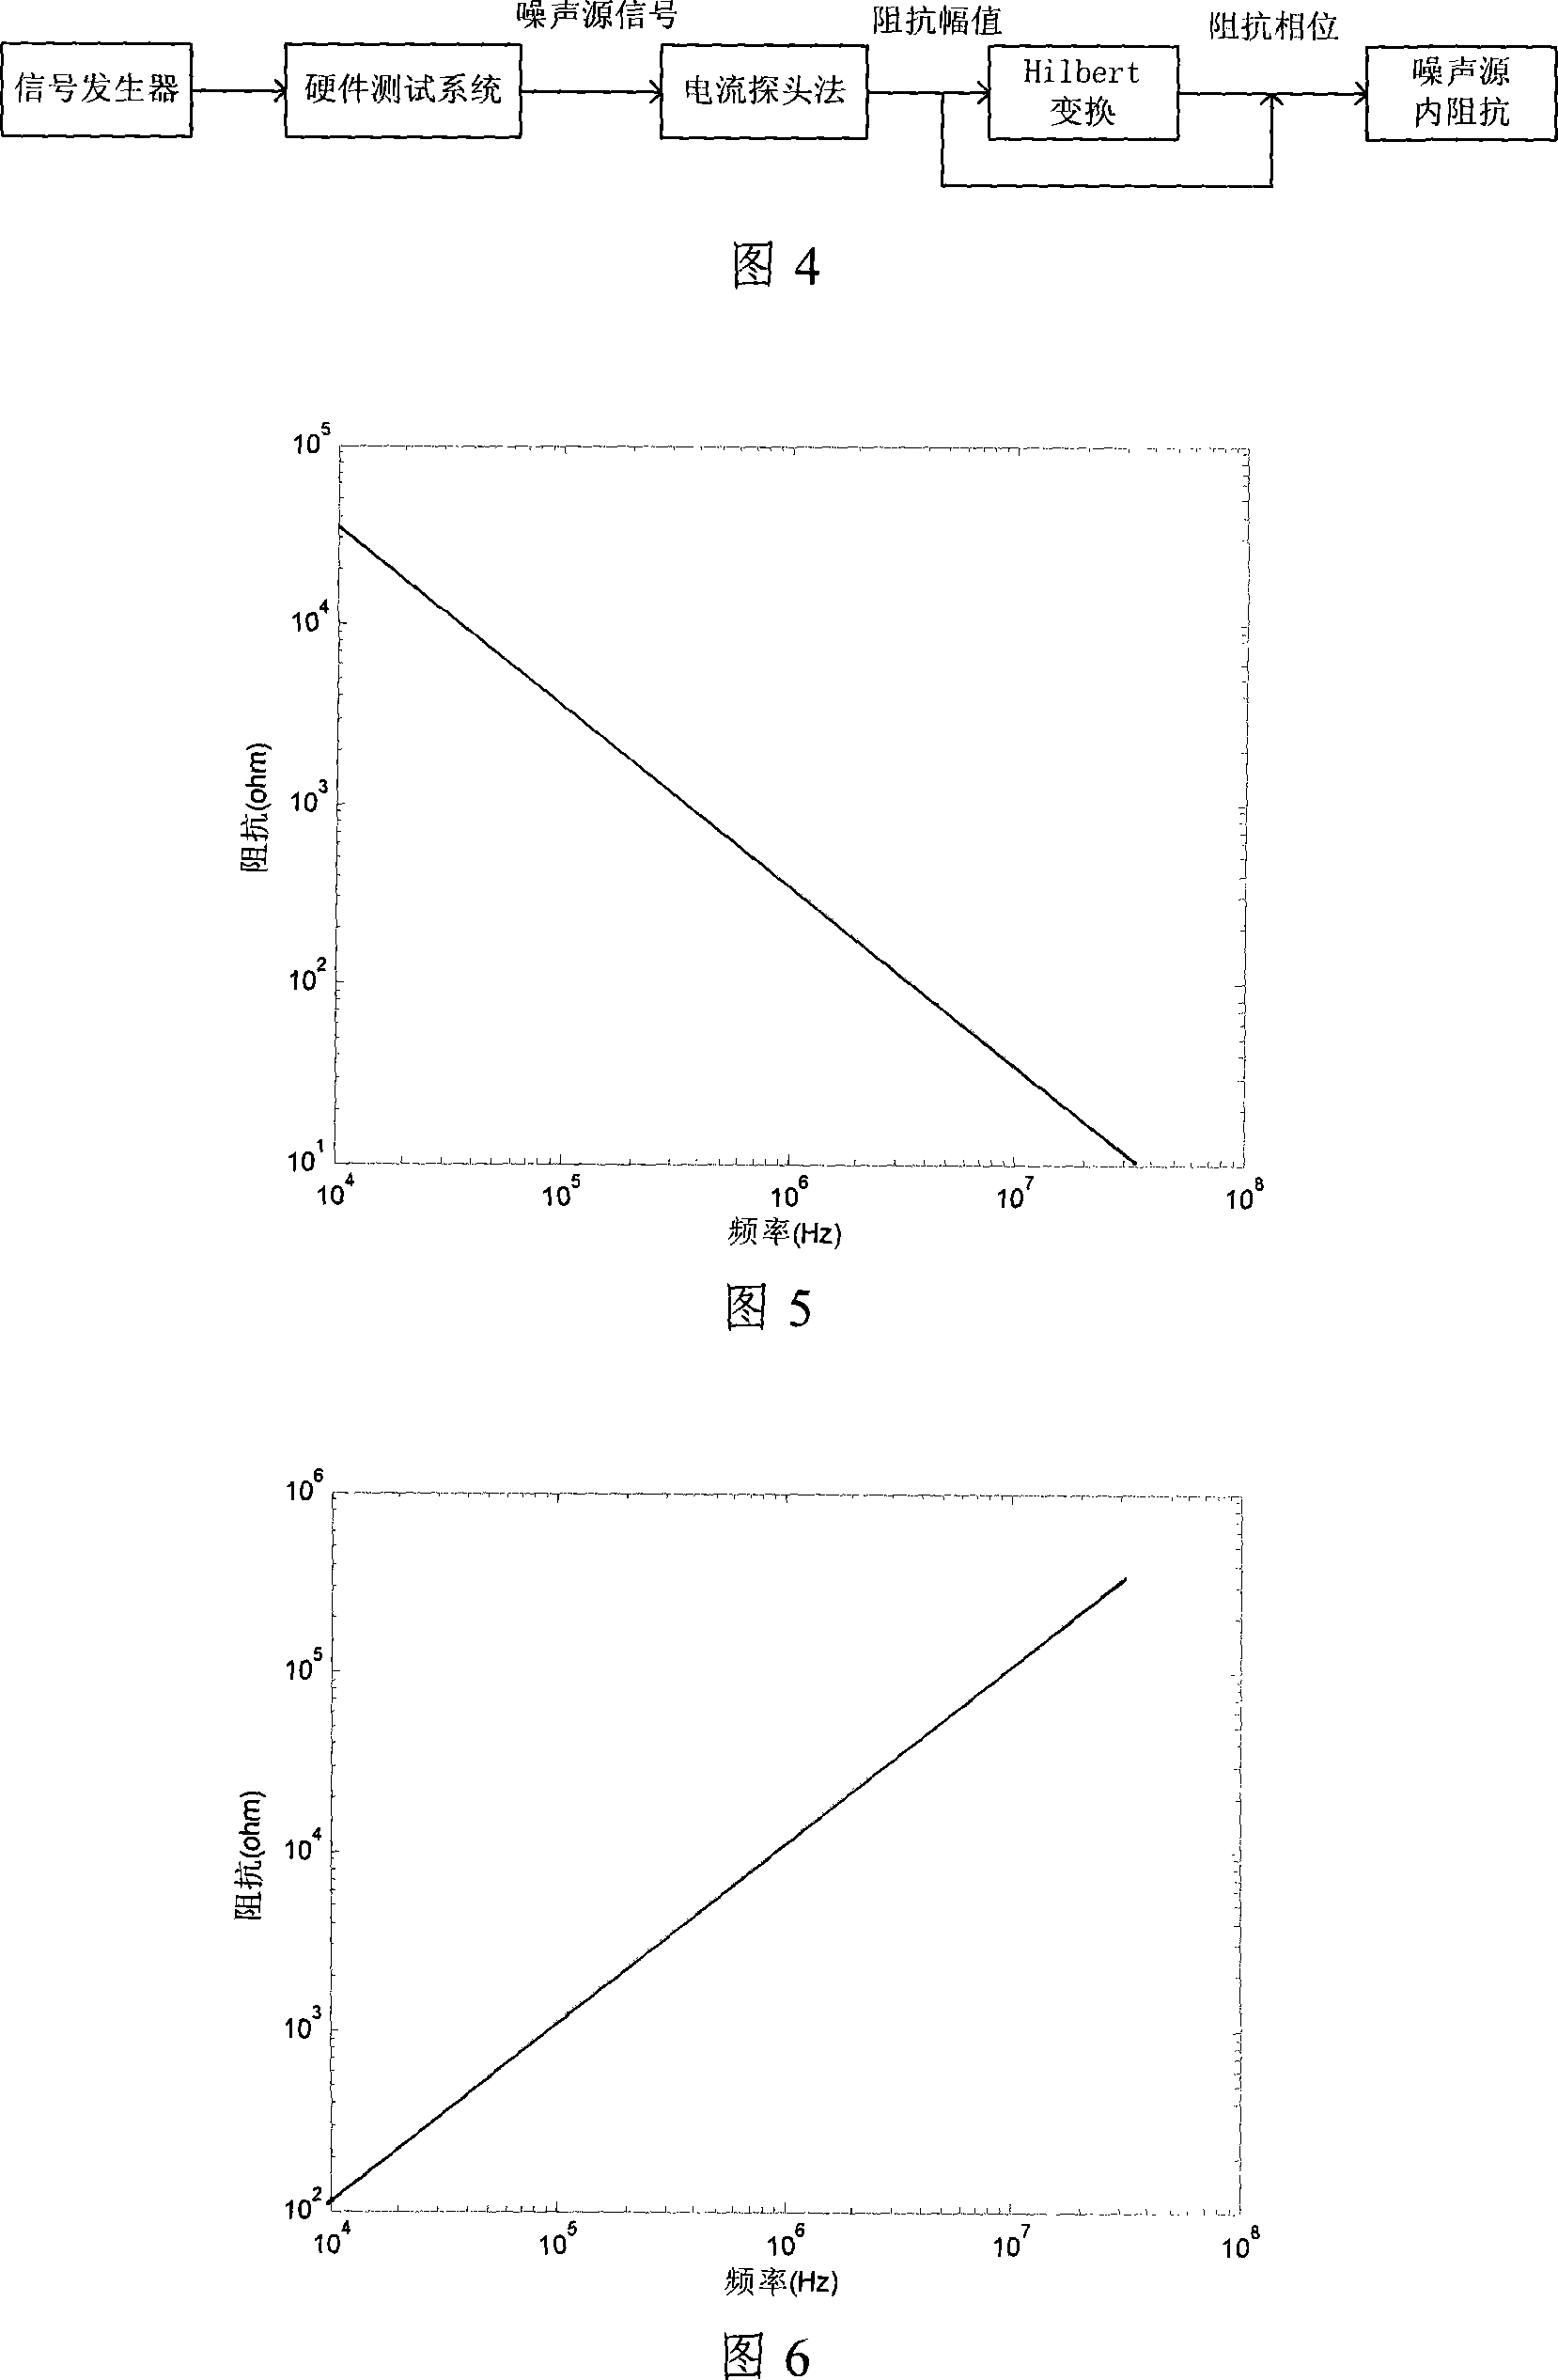 System for measuring internal impedance of noise source of switching power supply EMI based on Hilbert transform and current probe, and measuration method